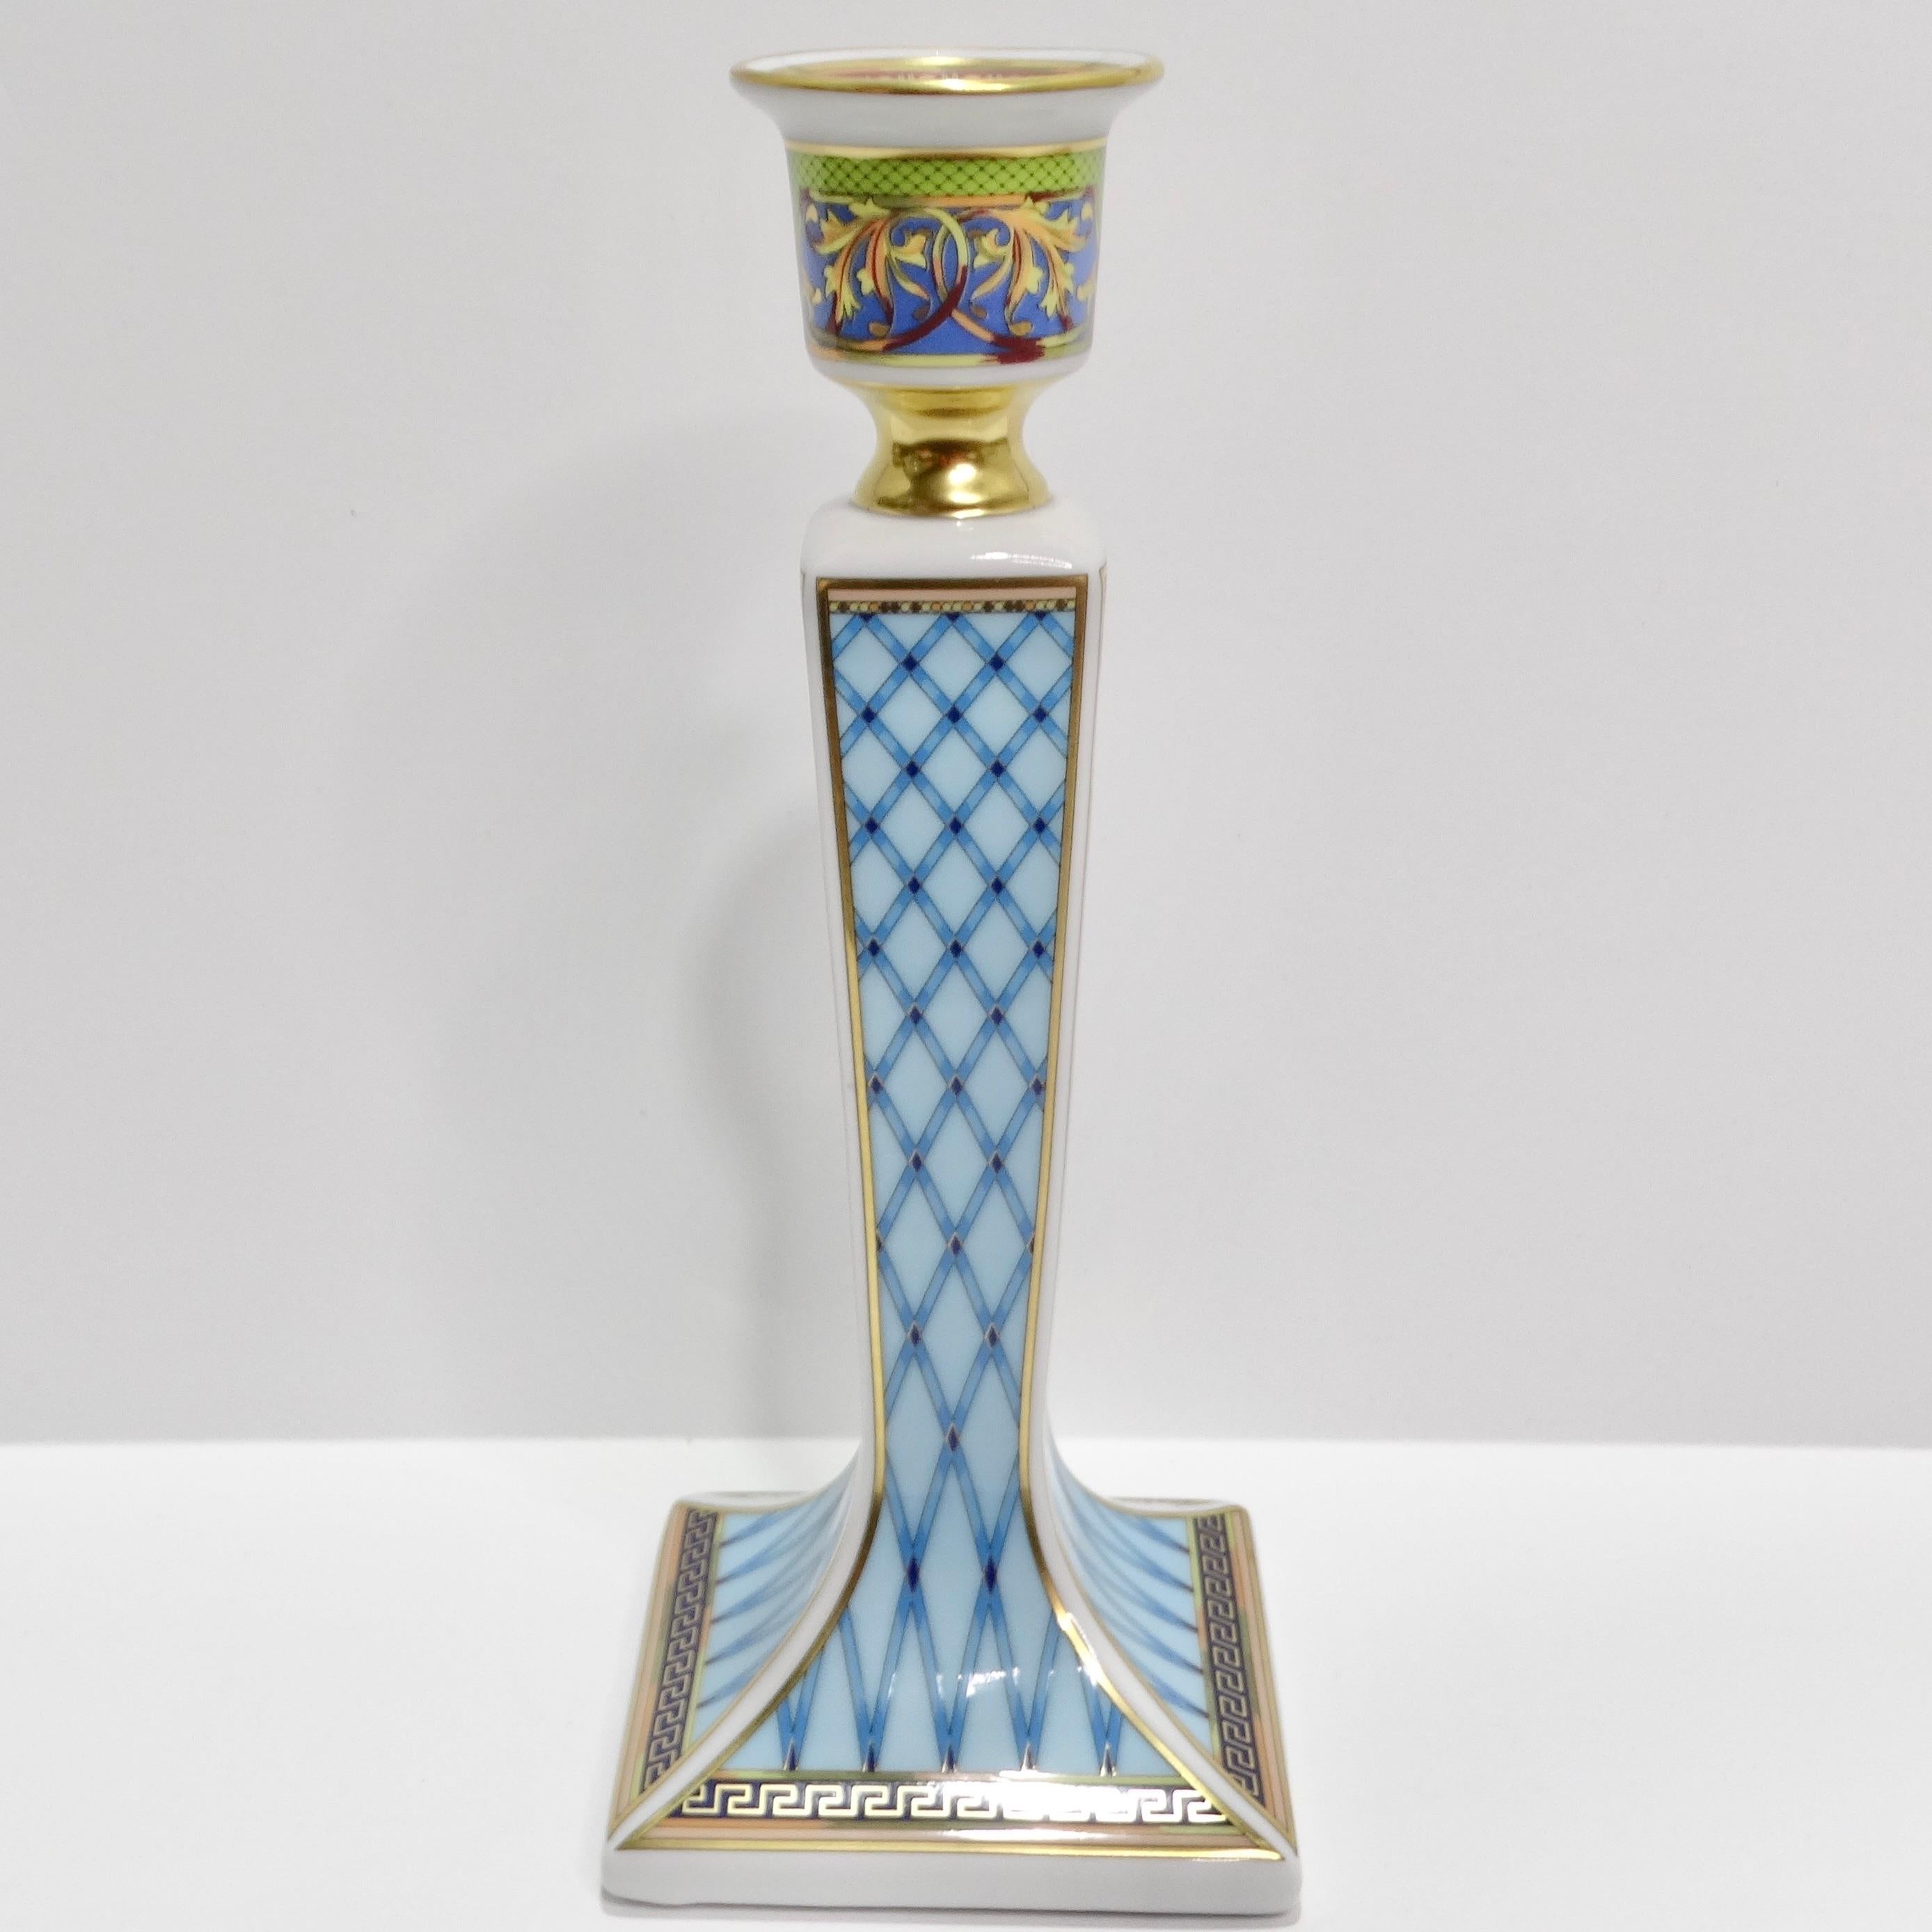 Introducing the Versace Rosenthal 1990s Russian Dream Porcelain Candle Holder – a luxurious and artistic addition that brings opulence to your home. Crafted from fine porcelain, this candle holder features an intricate multicolor 'Russian Dream'